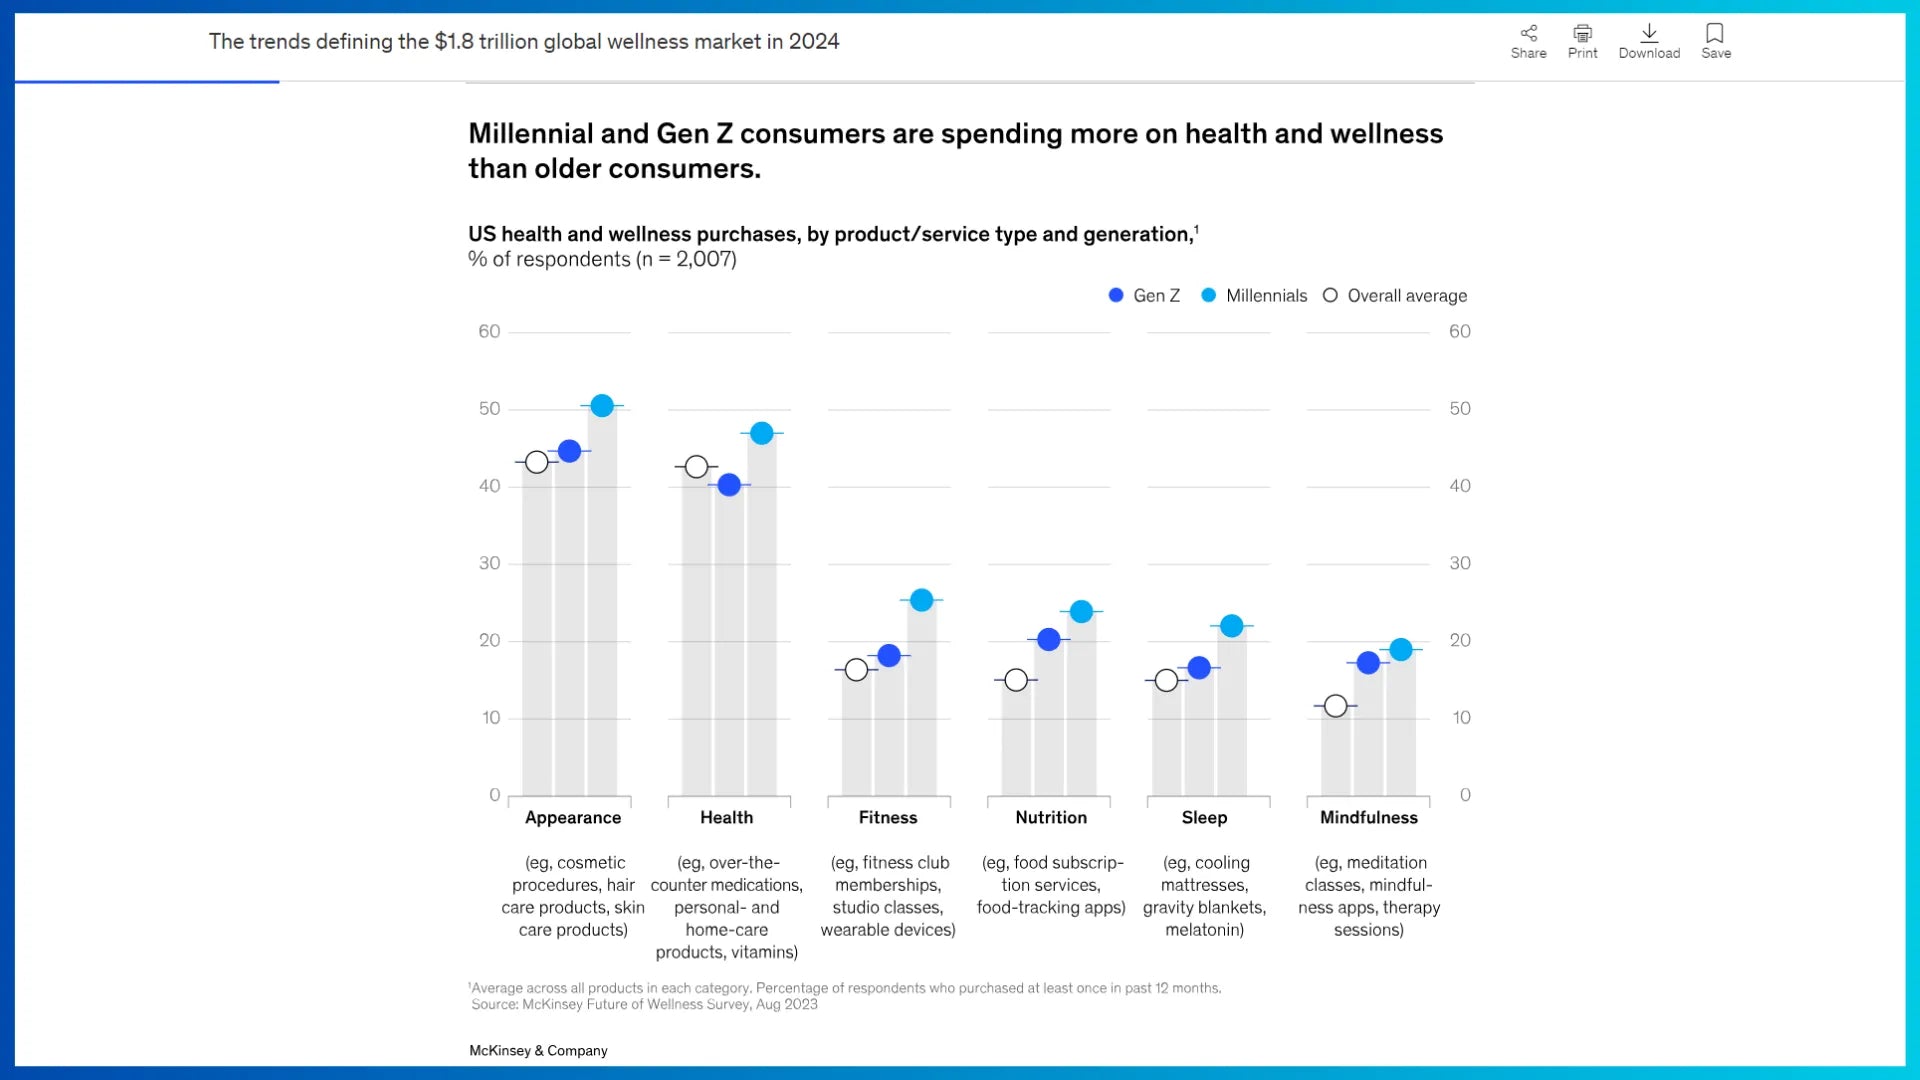 Data points from McKinsey Future of Wellness Survey